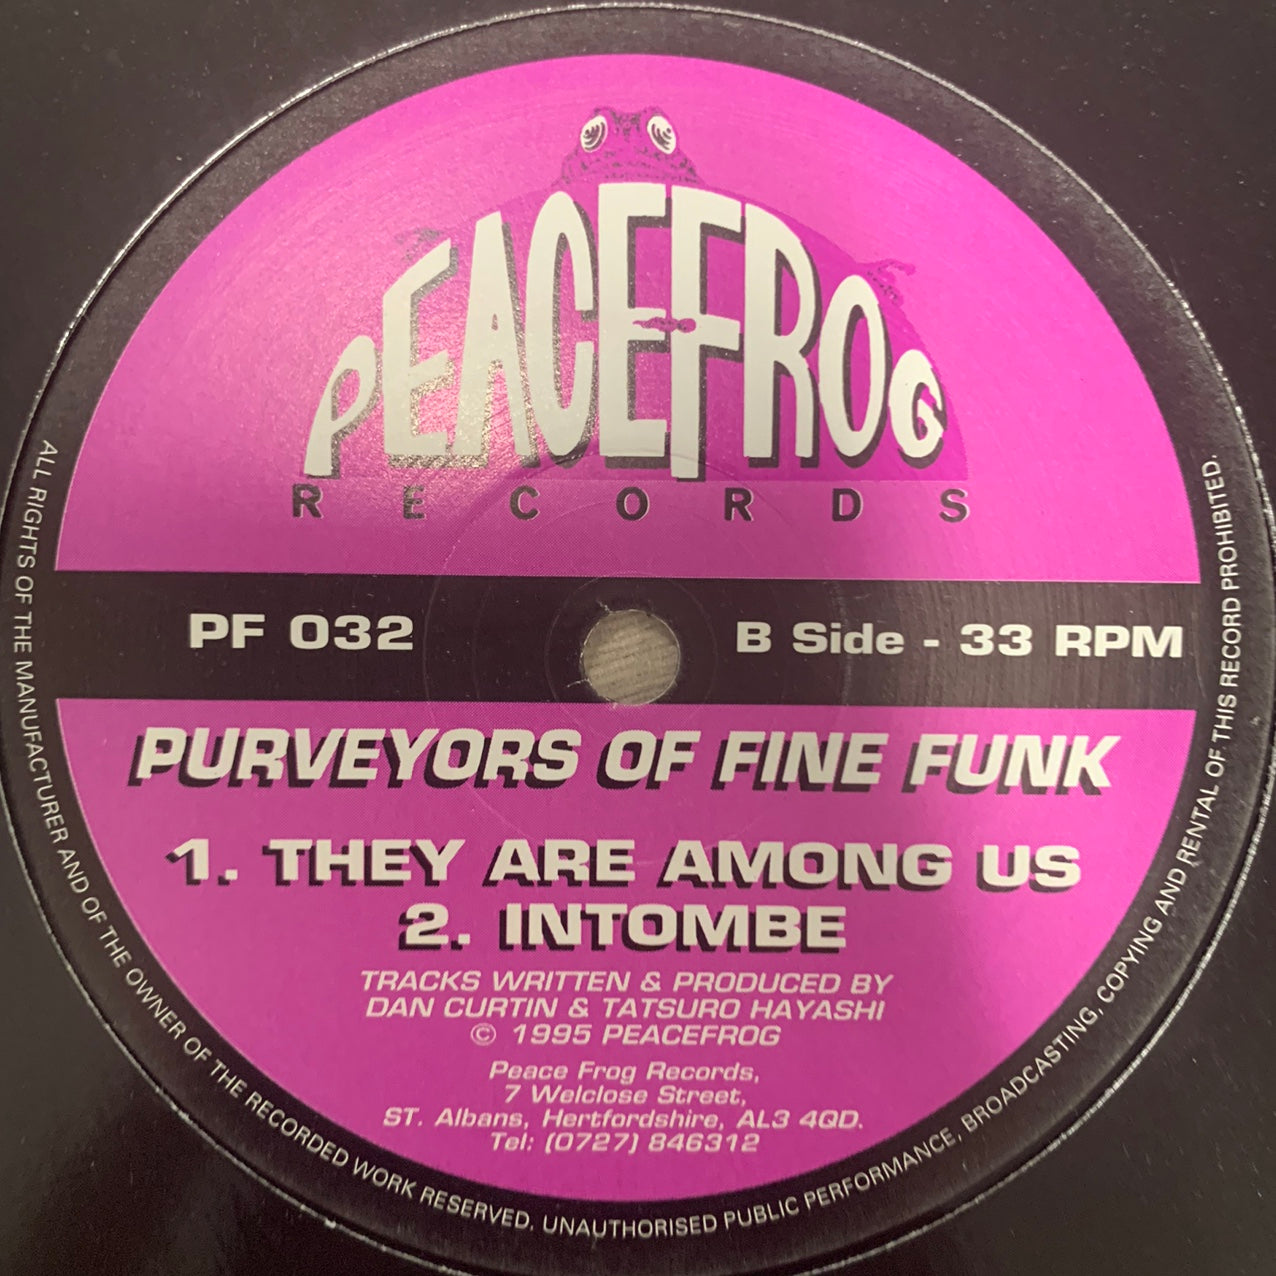 Purveyors Of Fine Funk “Space Is The Place”